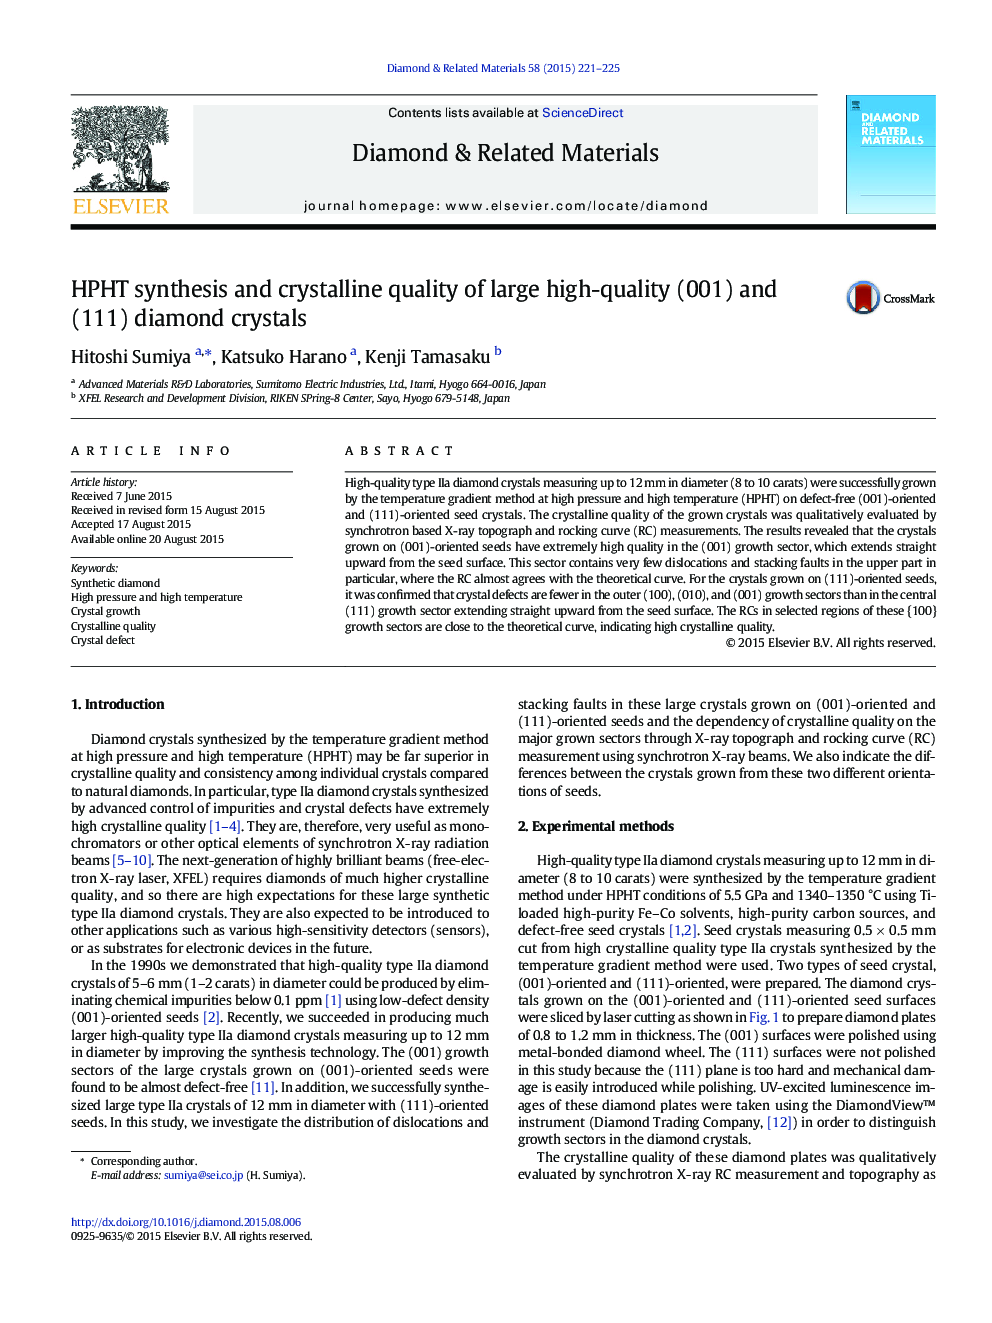 HPHT synthesis and crystalline quality of large high-quality (001) and (111) diamond crystals